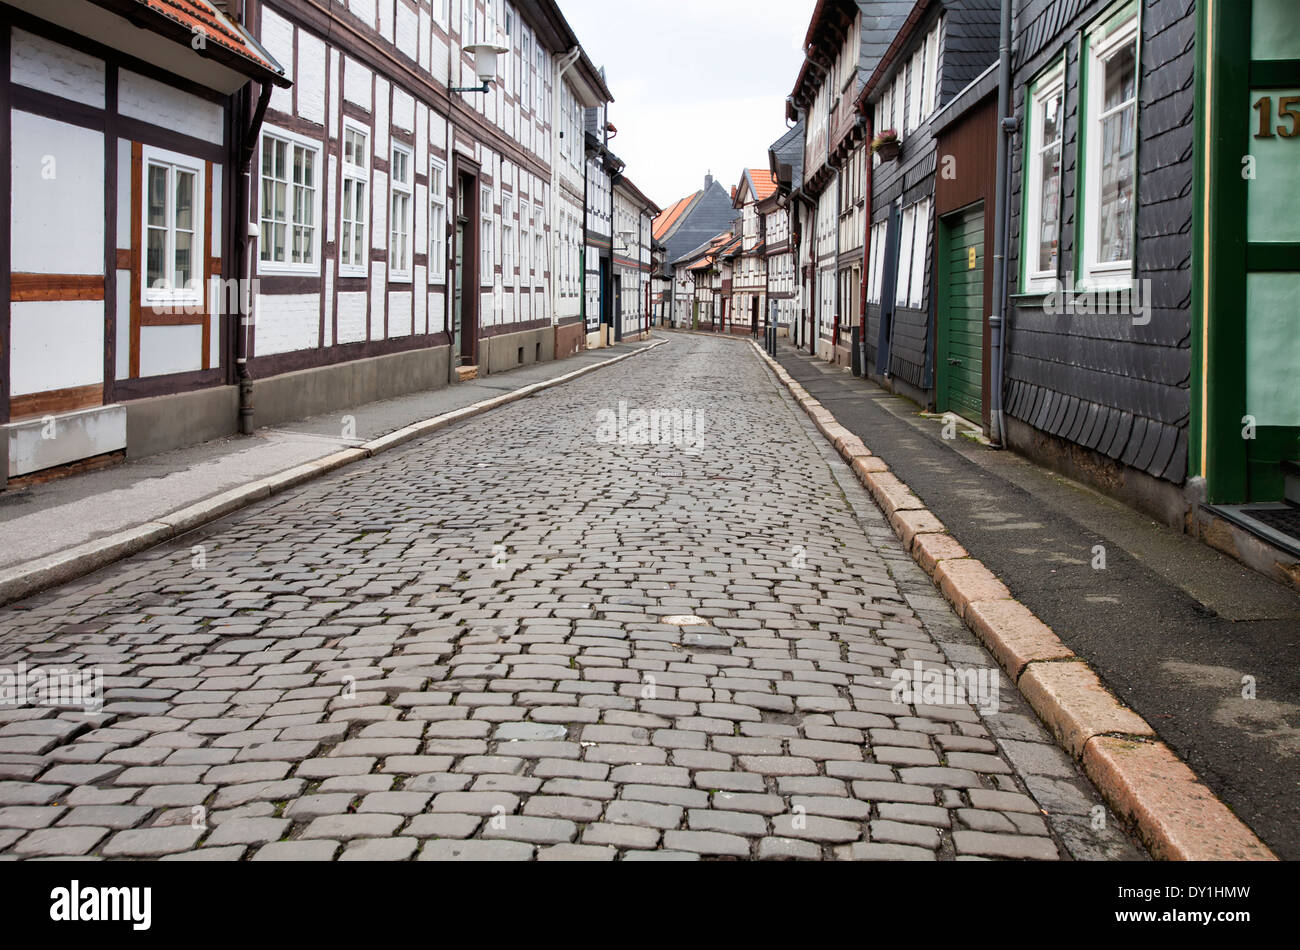 Half-timbered houses in the historic town centre, Goslar, Harz, Lower Saxony, Germany, Europe Stock Photo